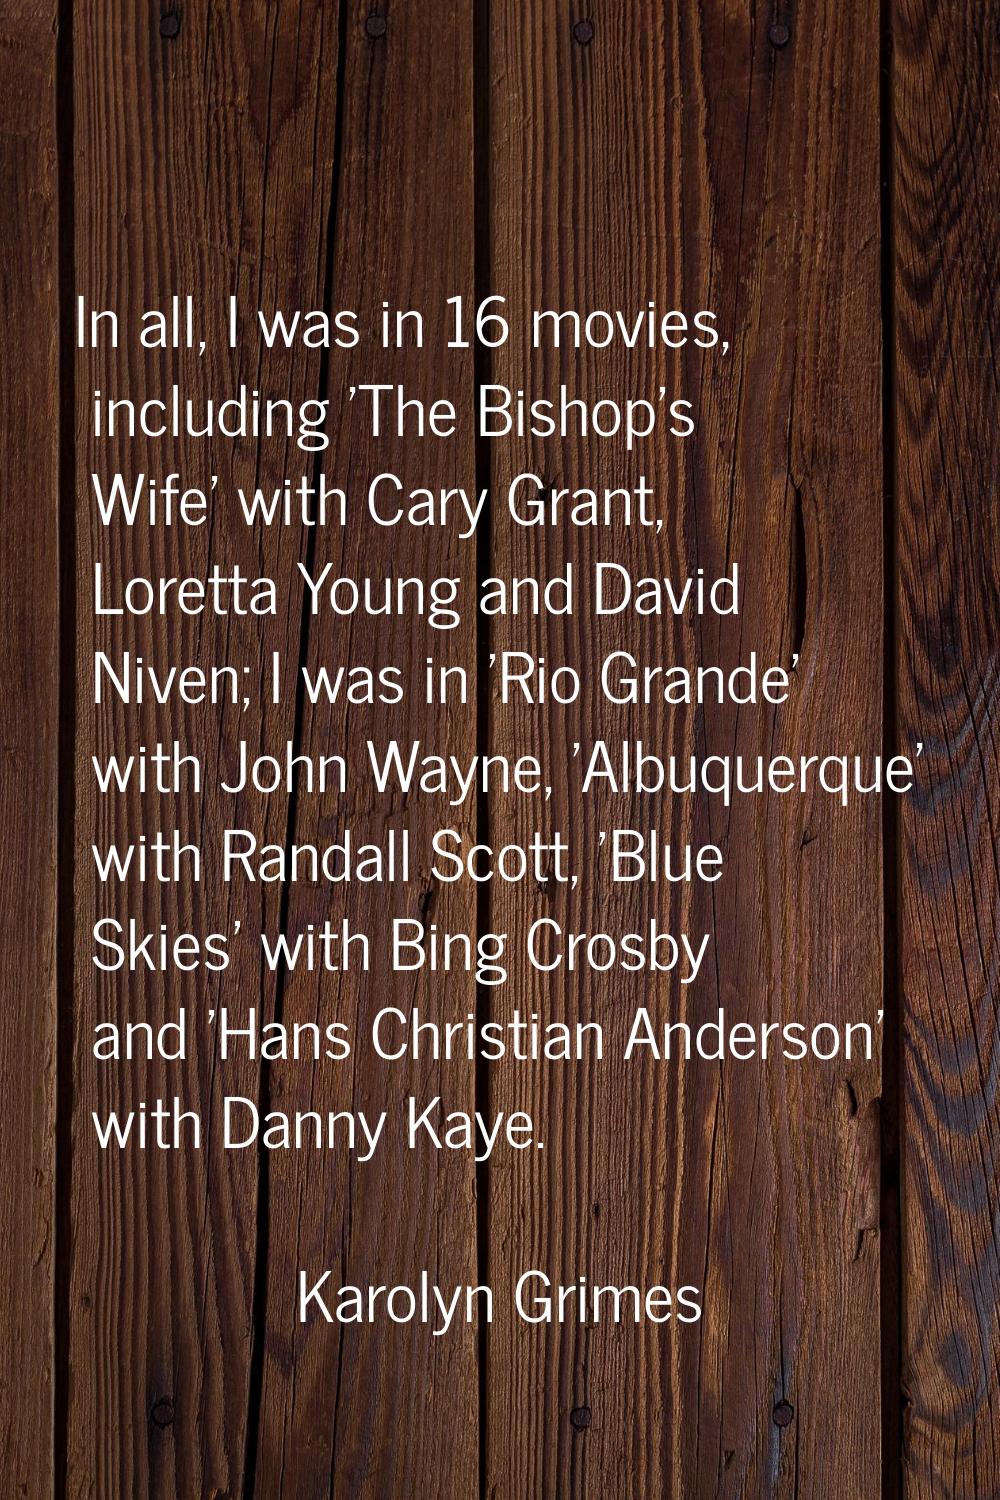 In all, I was in 16 movies, including 'The Bishop's Wife' with Cary Grant, Loretta Young and David 